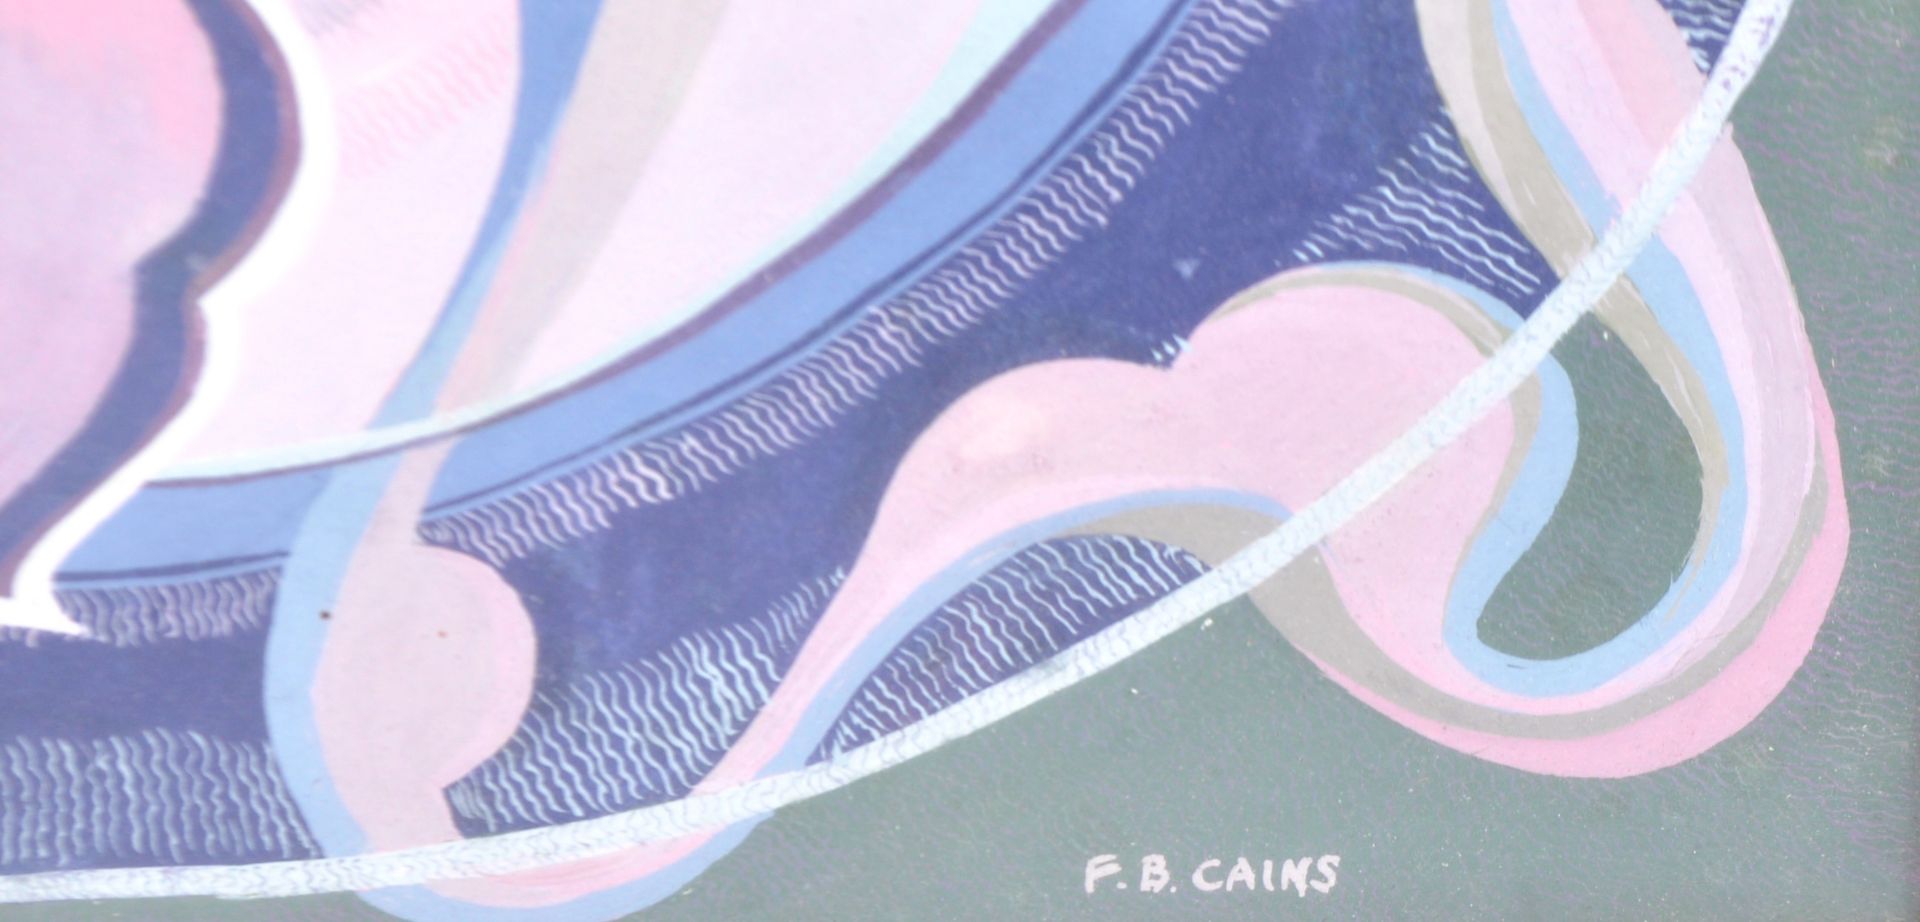 FLORENCE BLANCHE CAINS - MID 20TH CENTURY ABSTRACT PAINTING - Image 4 of 4